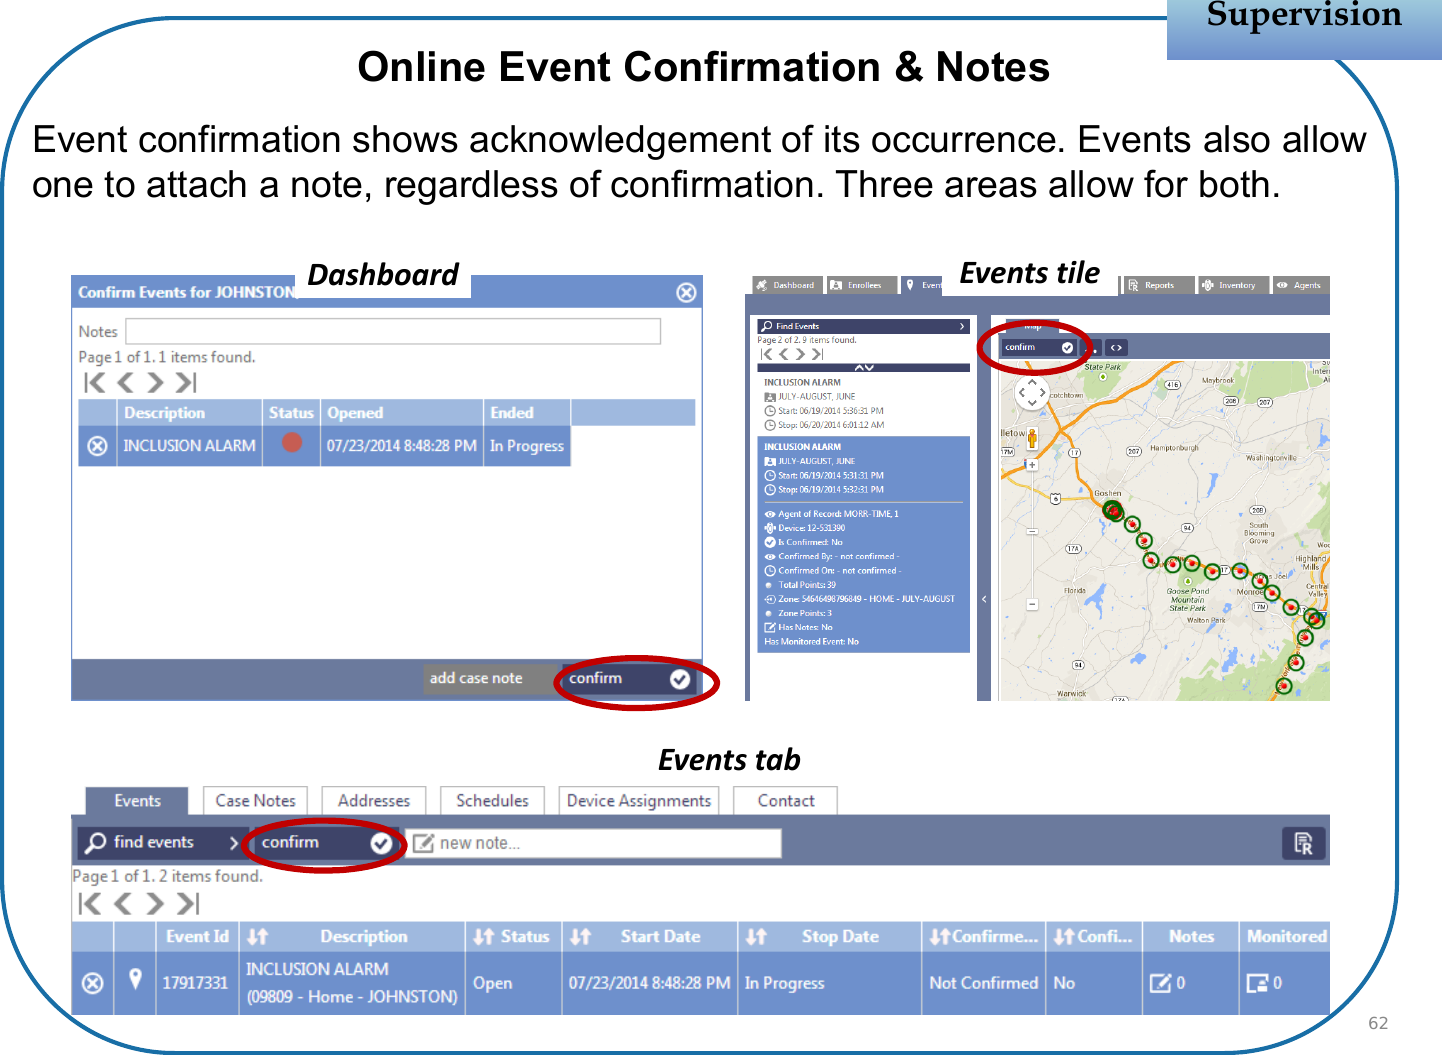 Online Event Confirmation &amp; NotesEvent confirmation shows acknowledgement of its occurrence. Events also allow one to attach a note, regardless of confirmation. Three areas allow for both.SupervisionSupervision62Dashboard EventstileEventstab